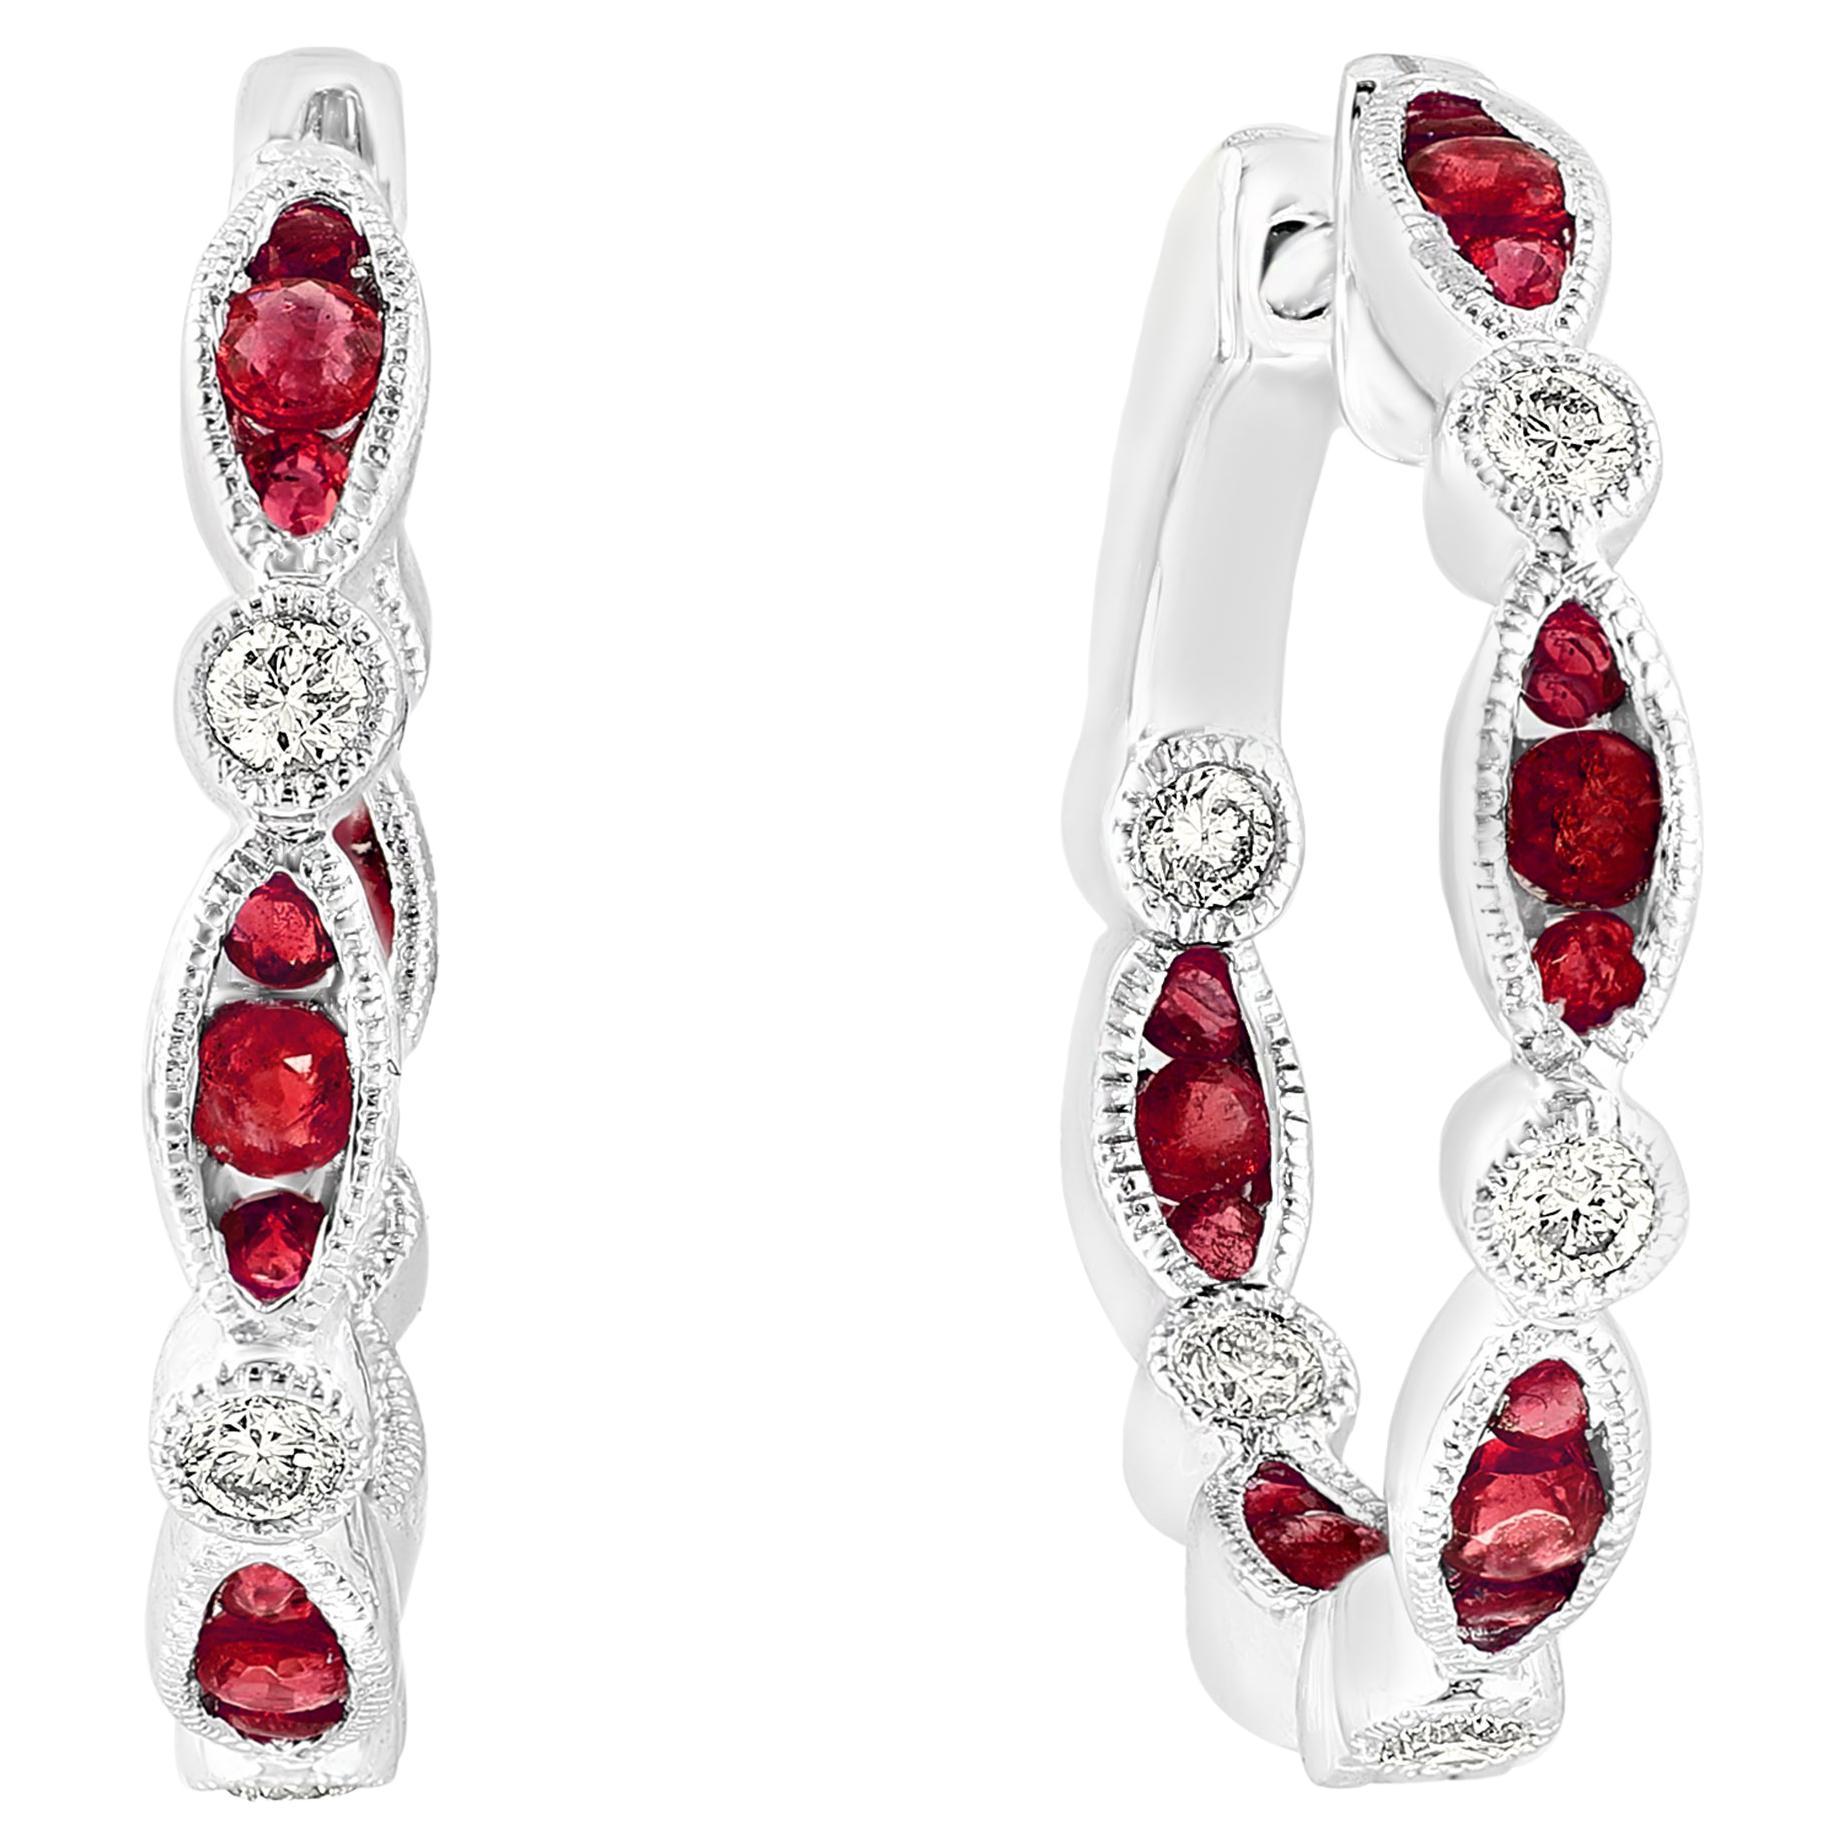 0.81 Carat Round cut Ruby and Diamond Hoop Earrings in 18K White Gold